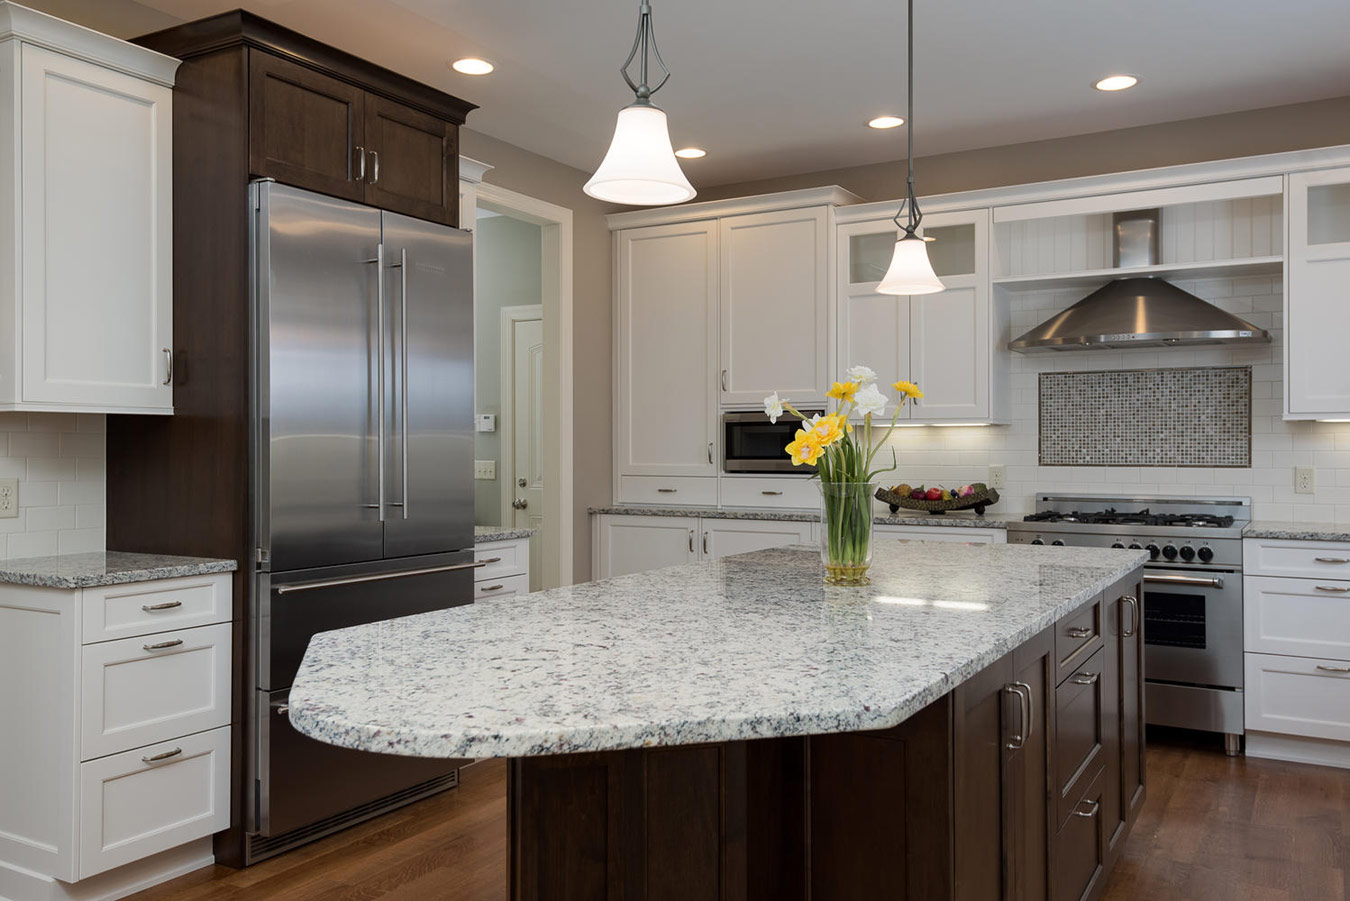 Time to Build the Kitchen of Your Dreams. Here Are Our Favorite Countertop Materials You Need to Try!